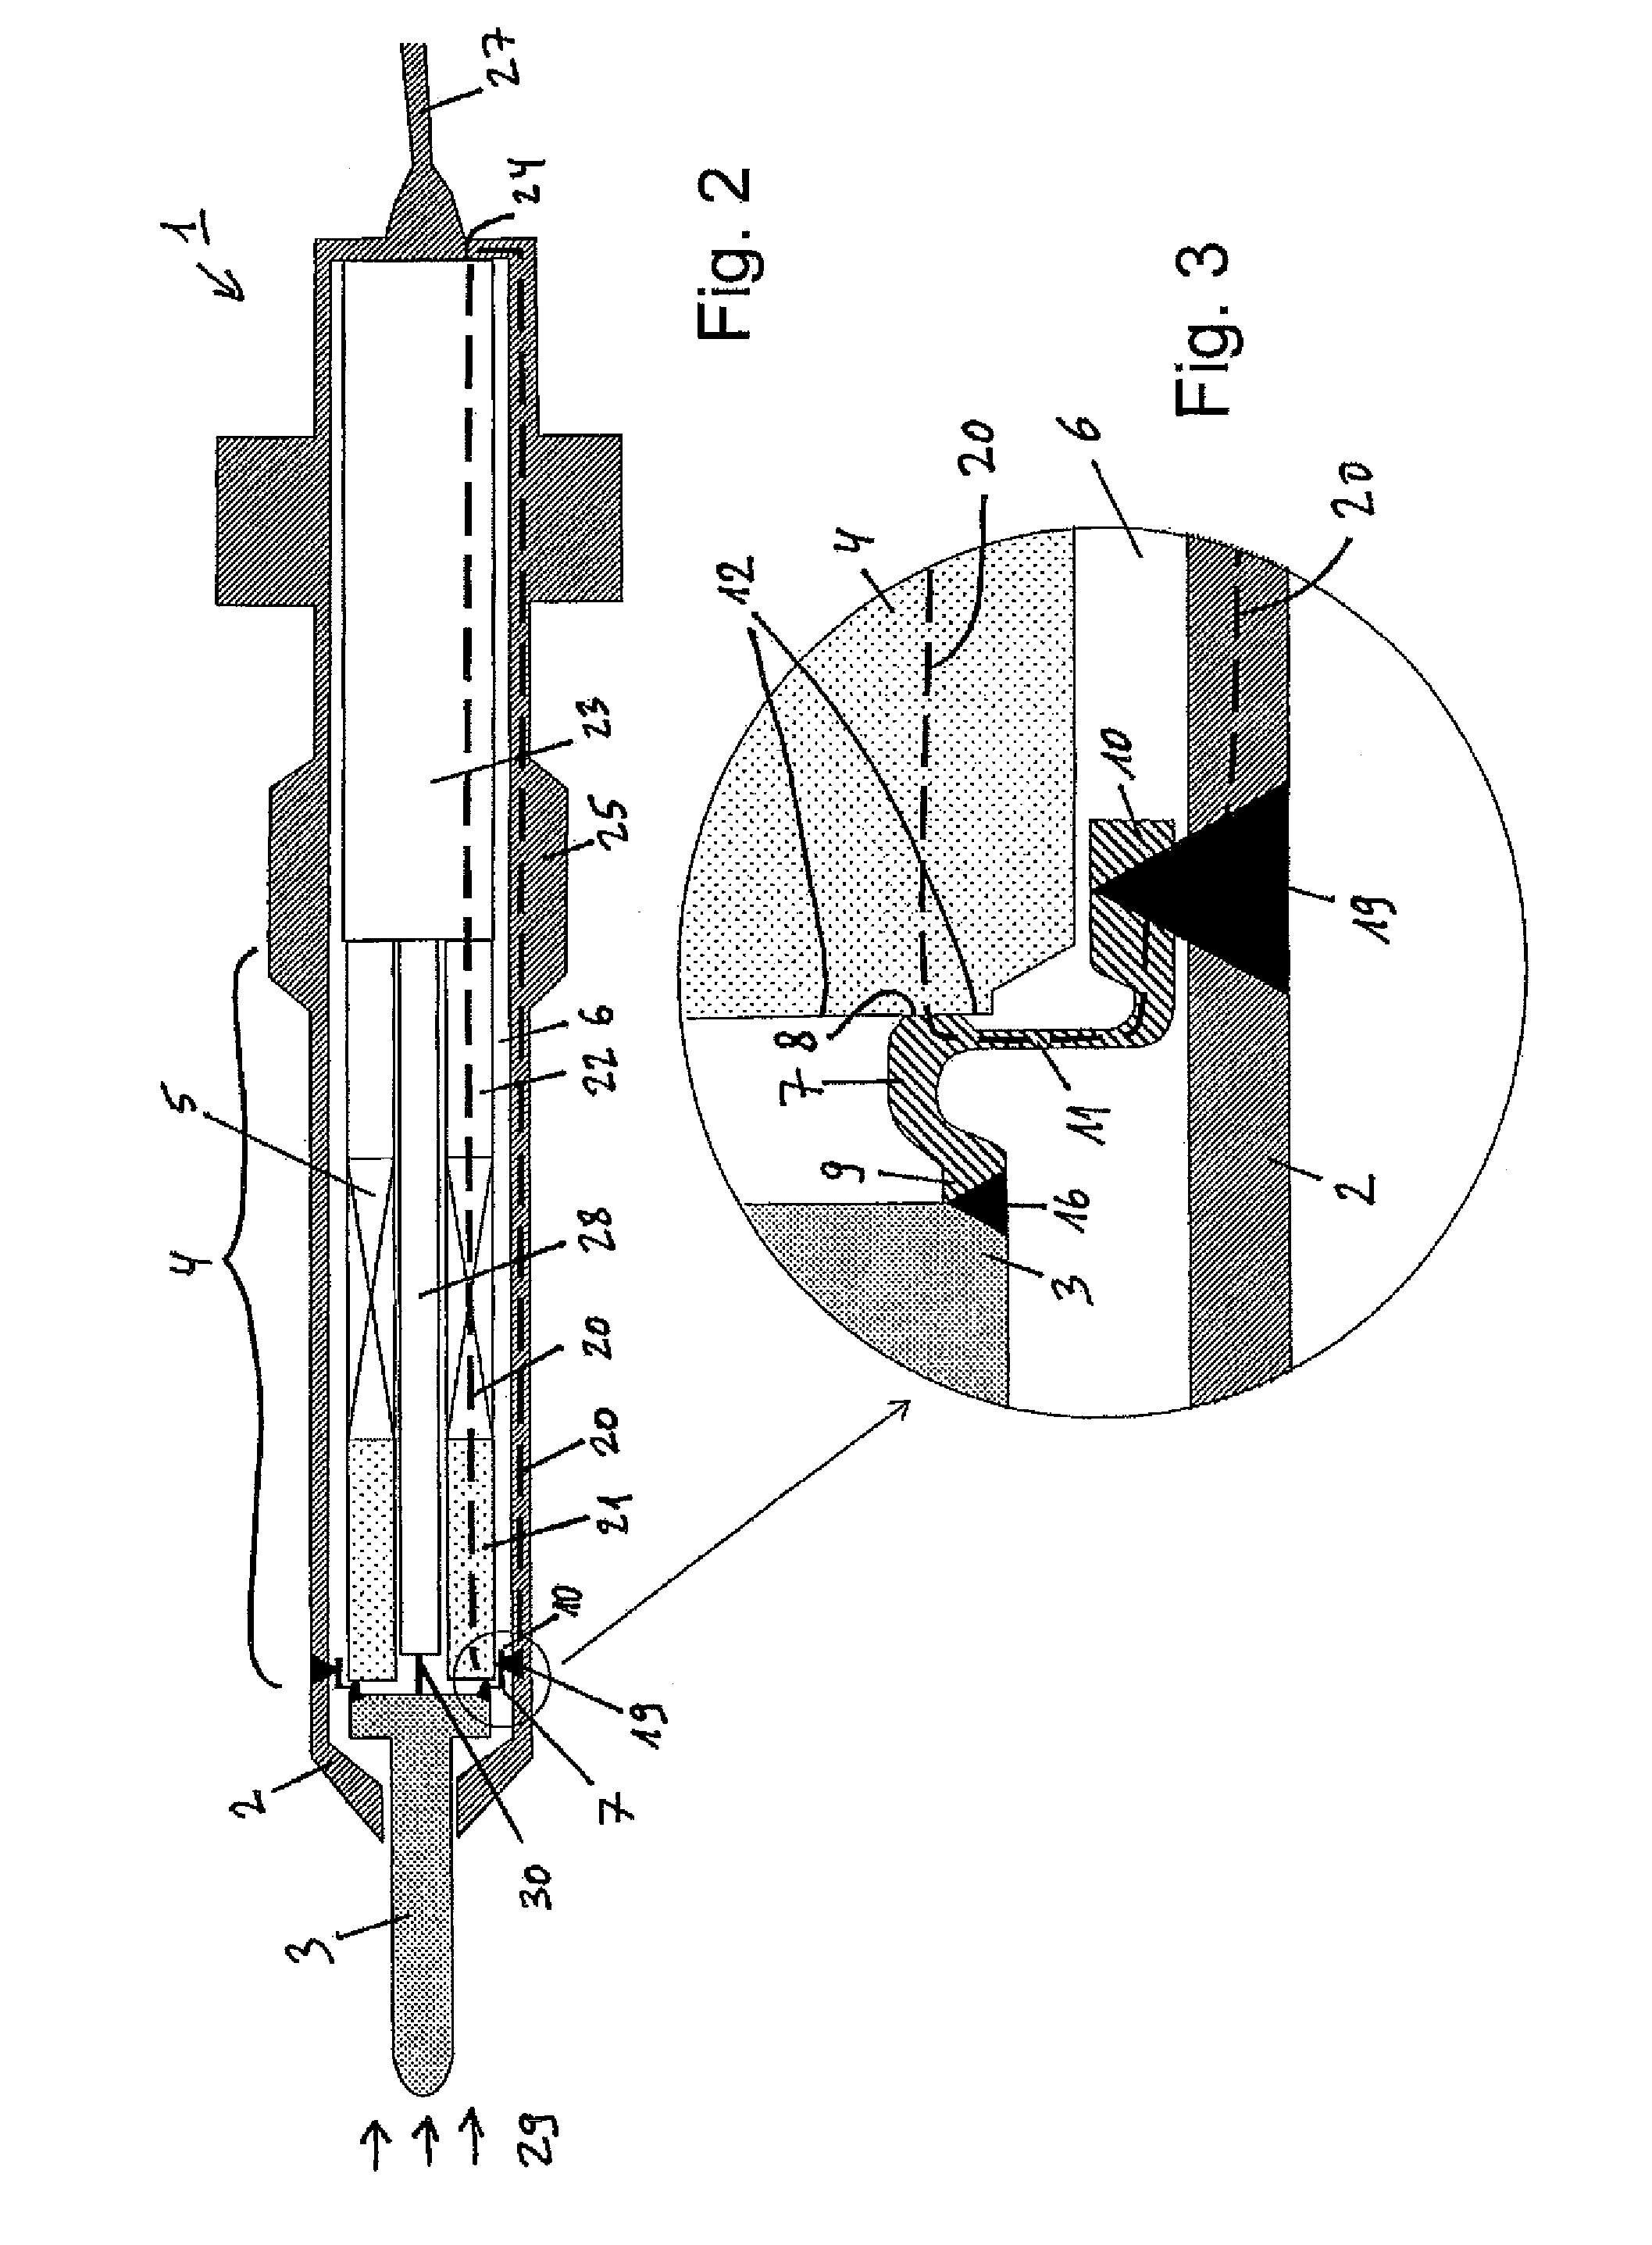 Pressure sensor for measurements in a chamber of an internal combustion engine